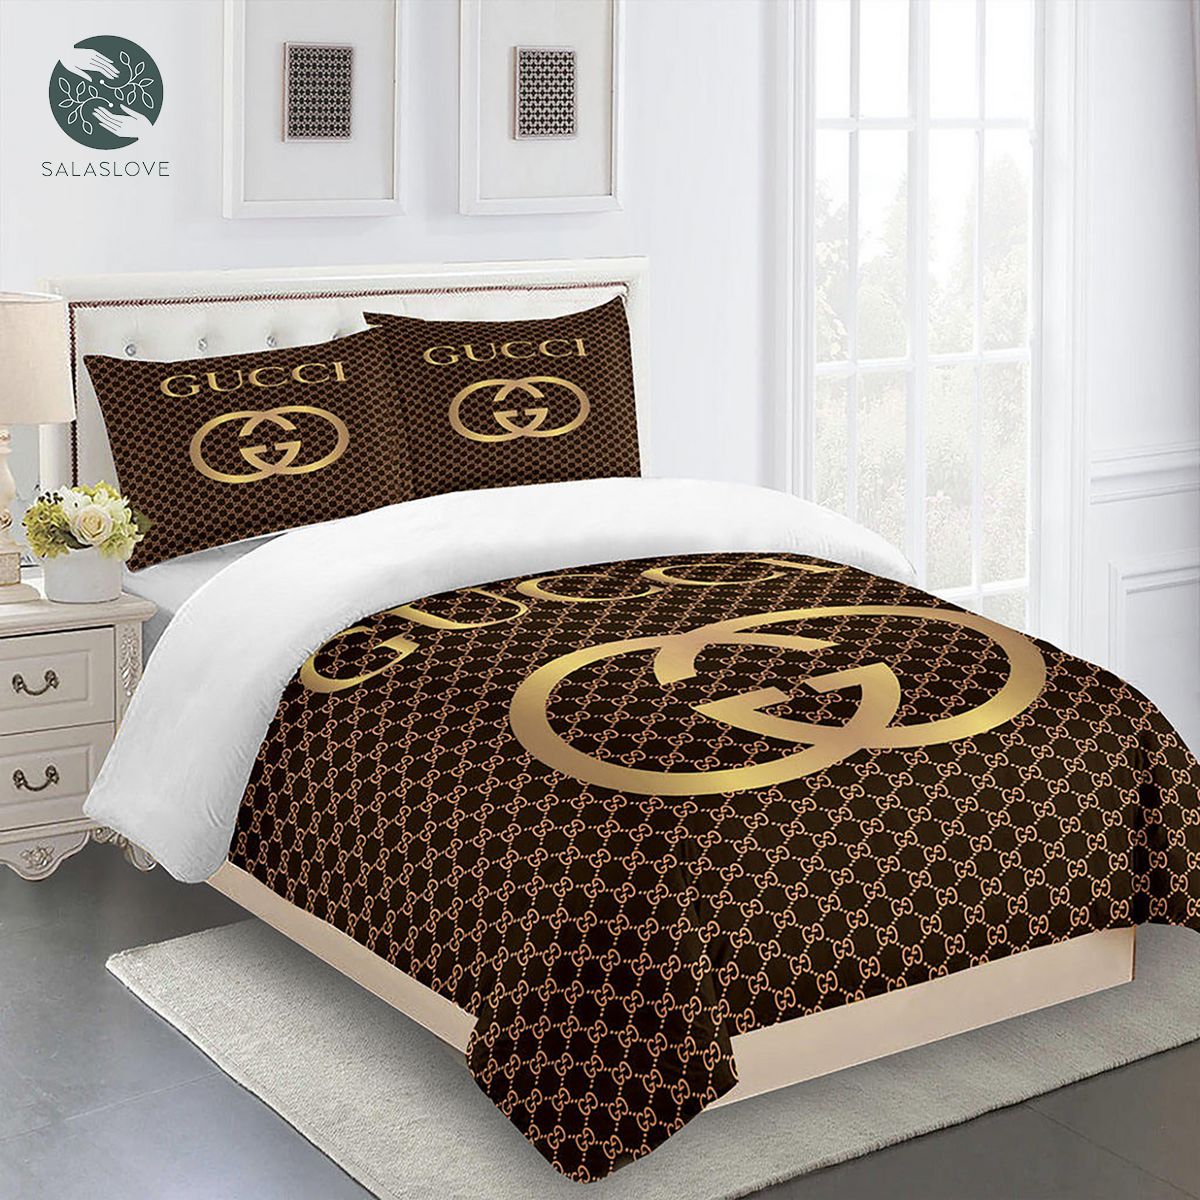 Gucci Bedding Set Dark Brown And Gold Luxury Duvet Cover Bedding Sets